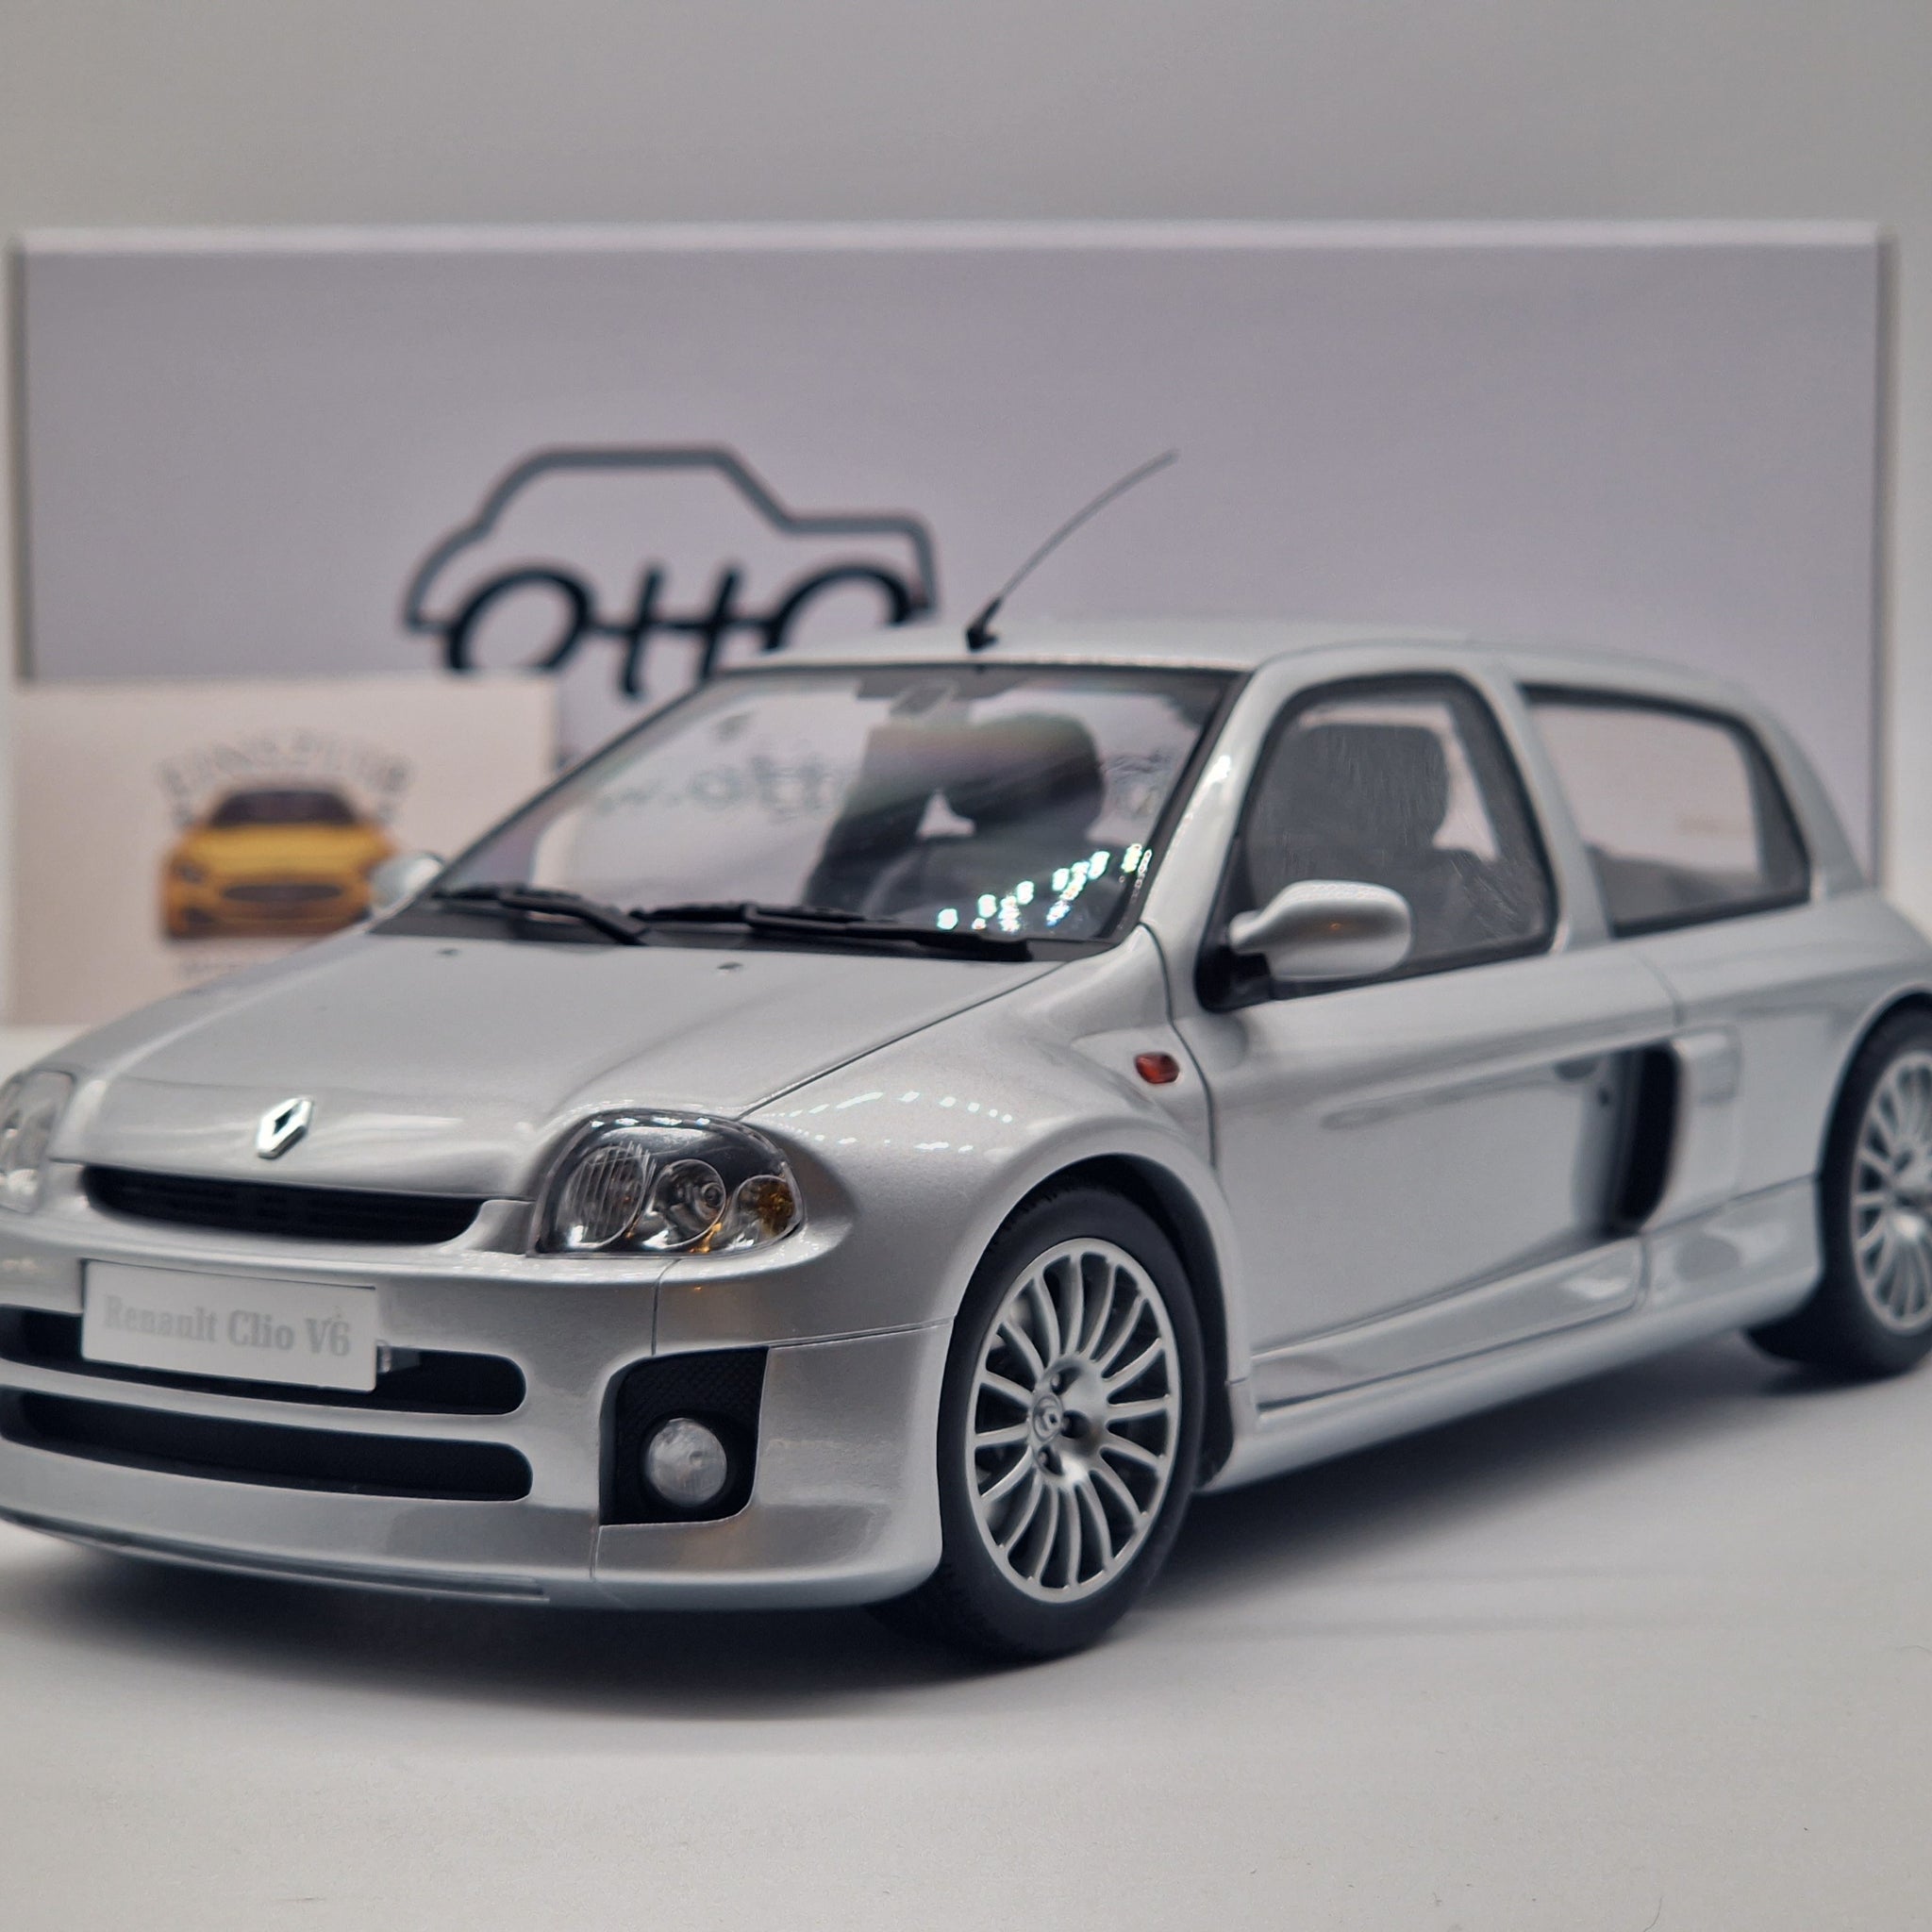 Renault Clio V6 Phase 1 2001 Silver